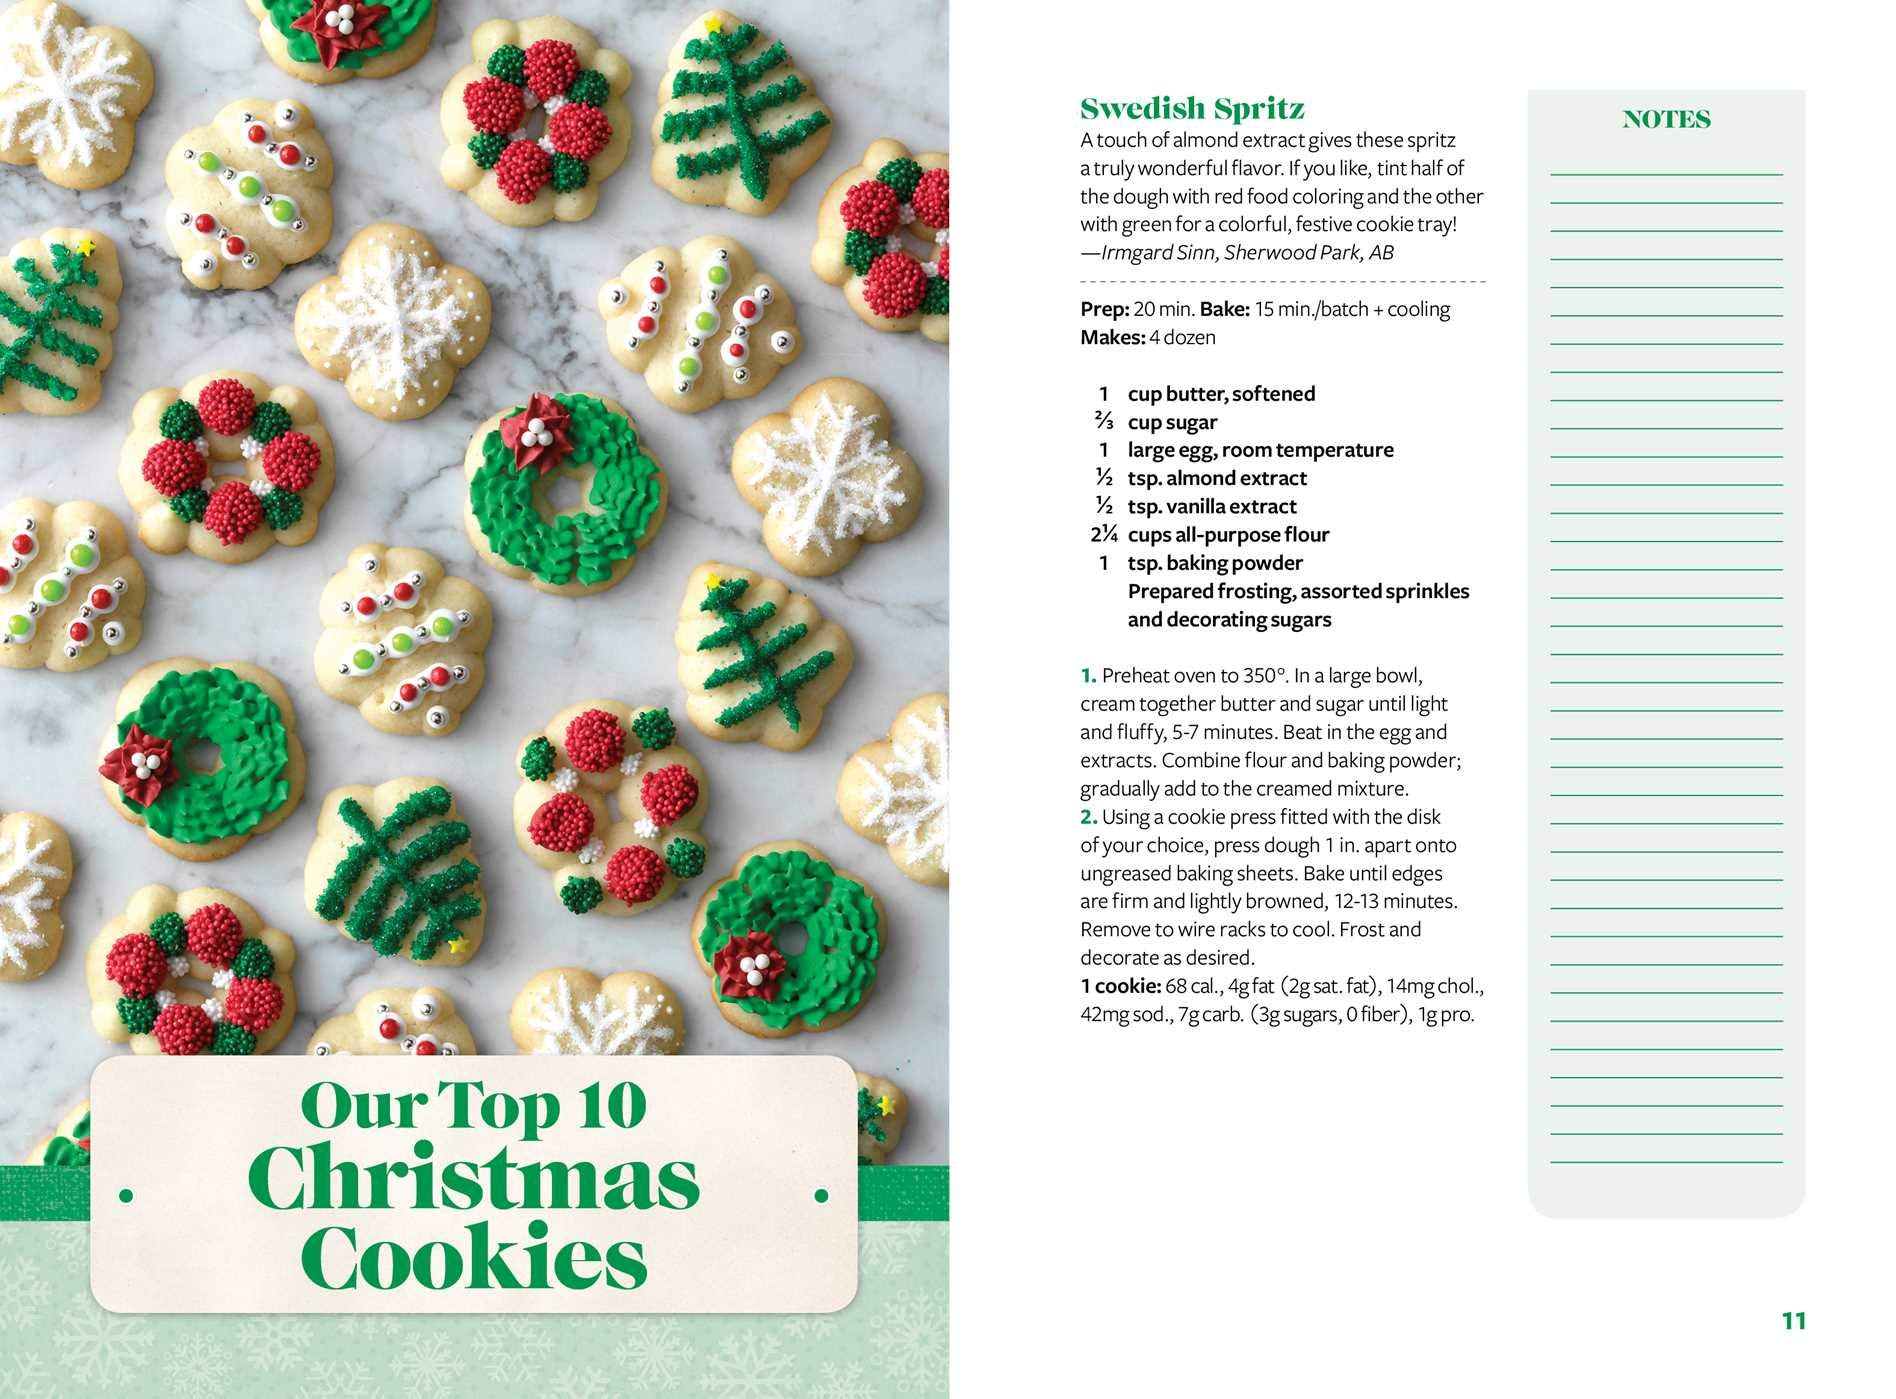 Taste of Home Christmas Cookies Mini Binder: 100+ Sweets for a simply magical holiday (TOH Mini Binder)